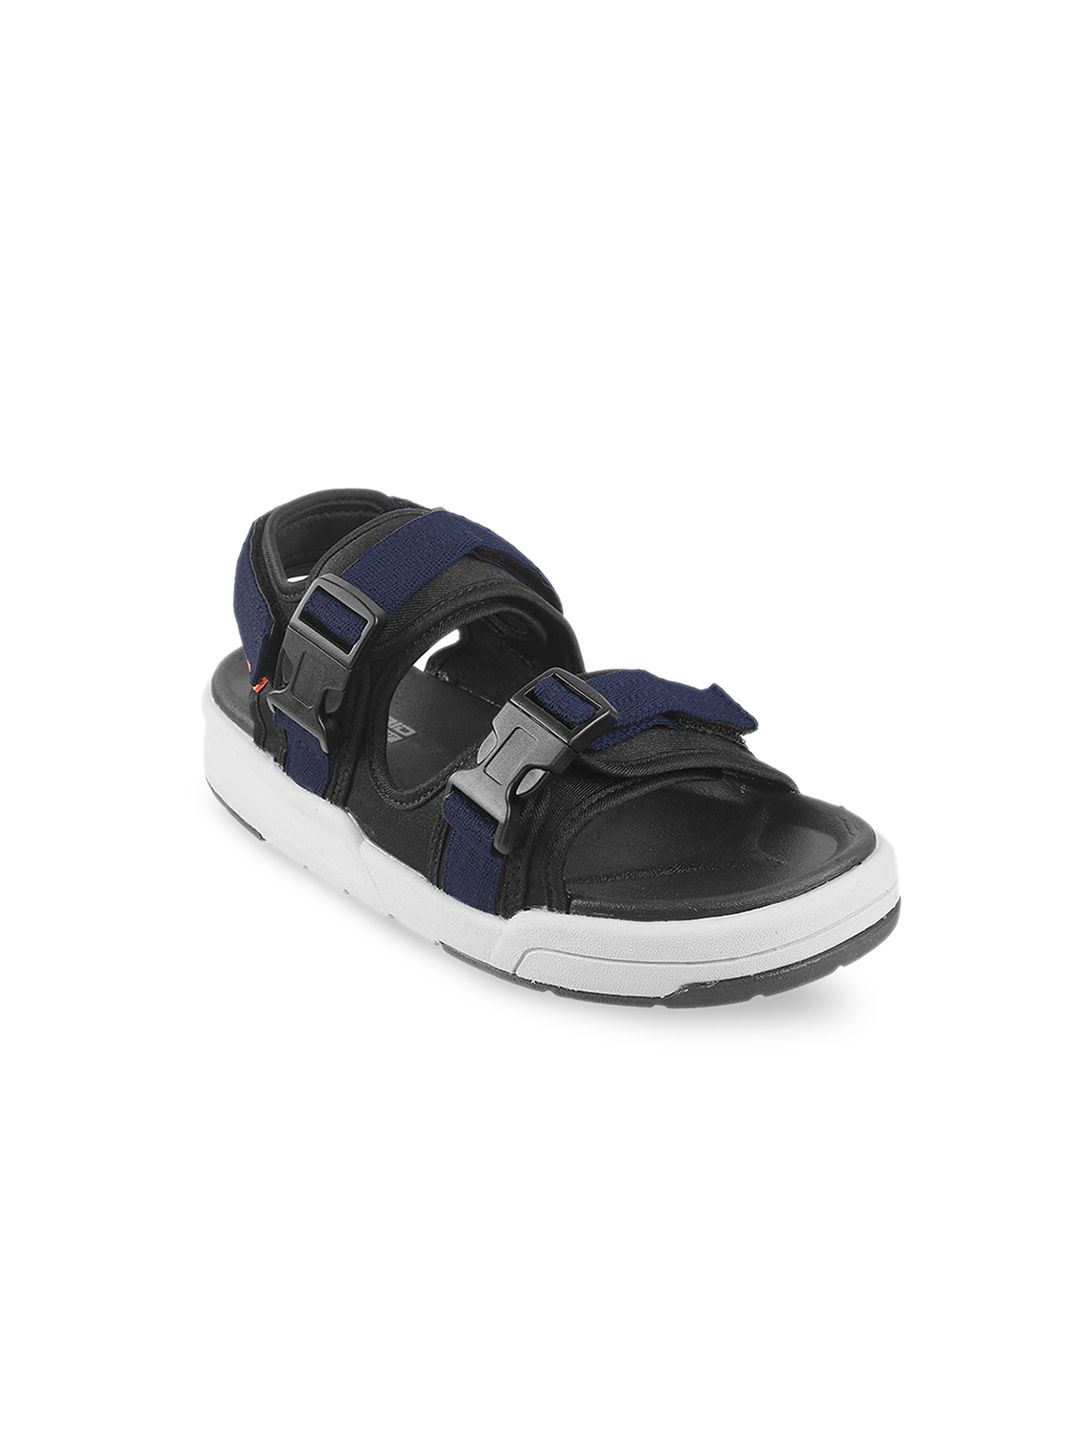 Vento Unisex Navy Blue & Grey Solid Sports Sandals Price in India